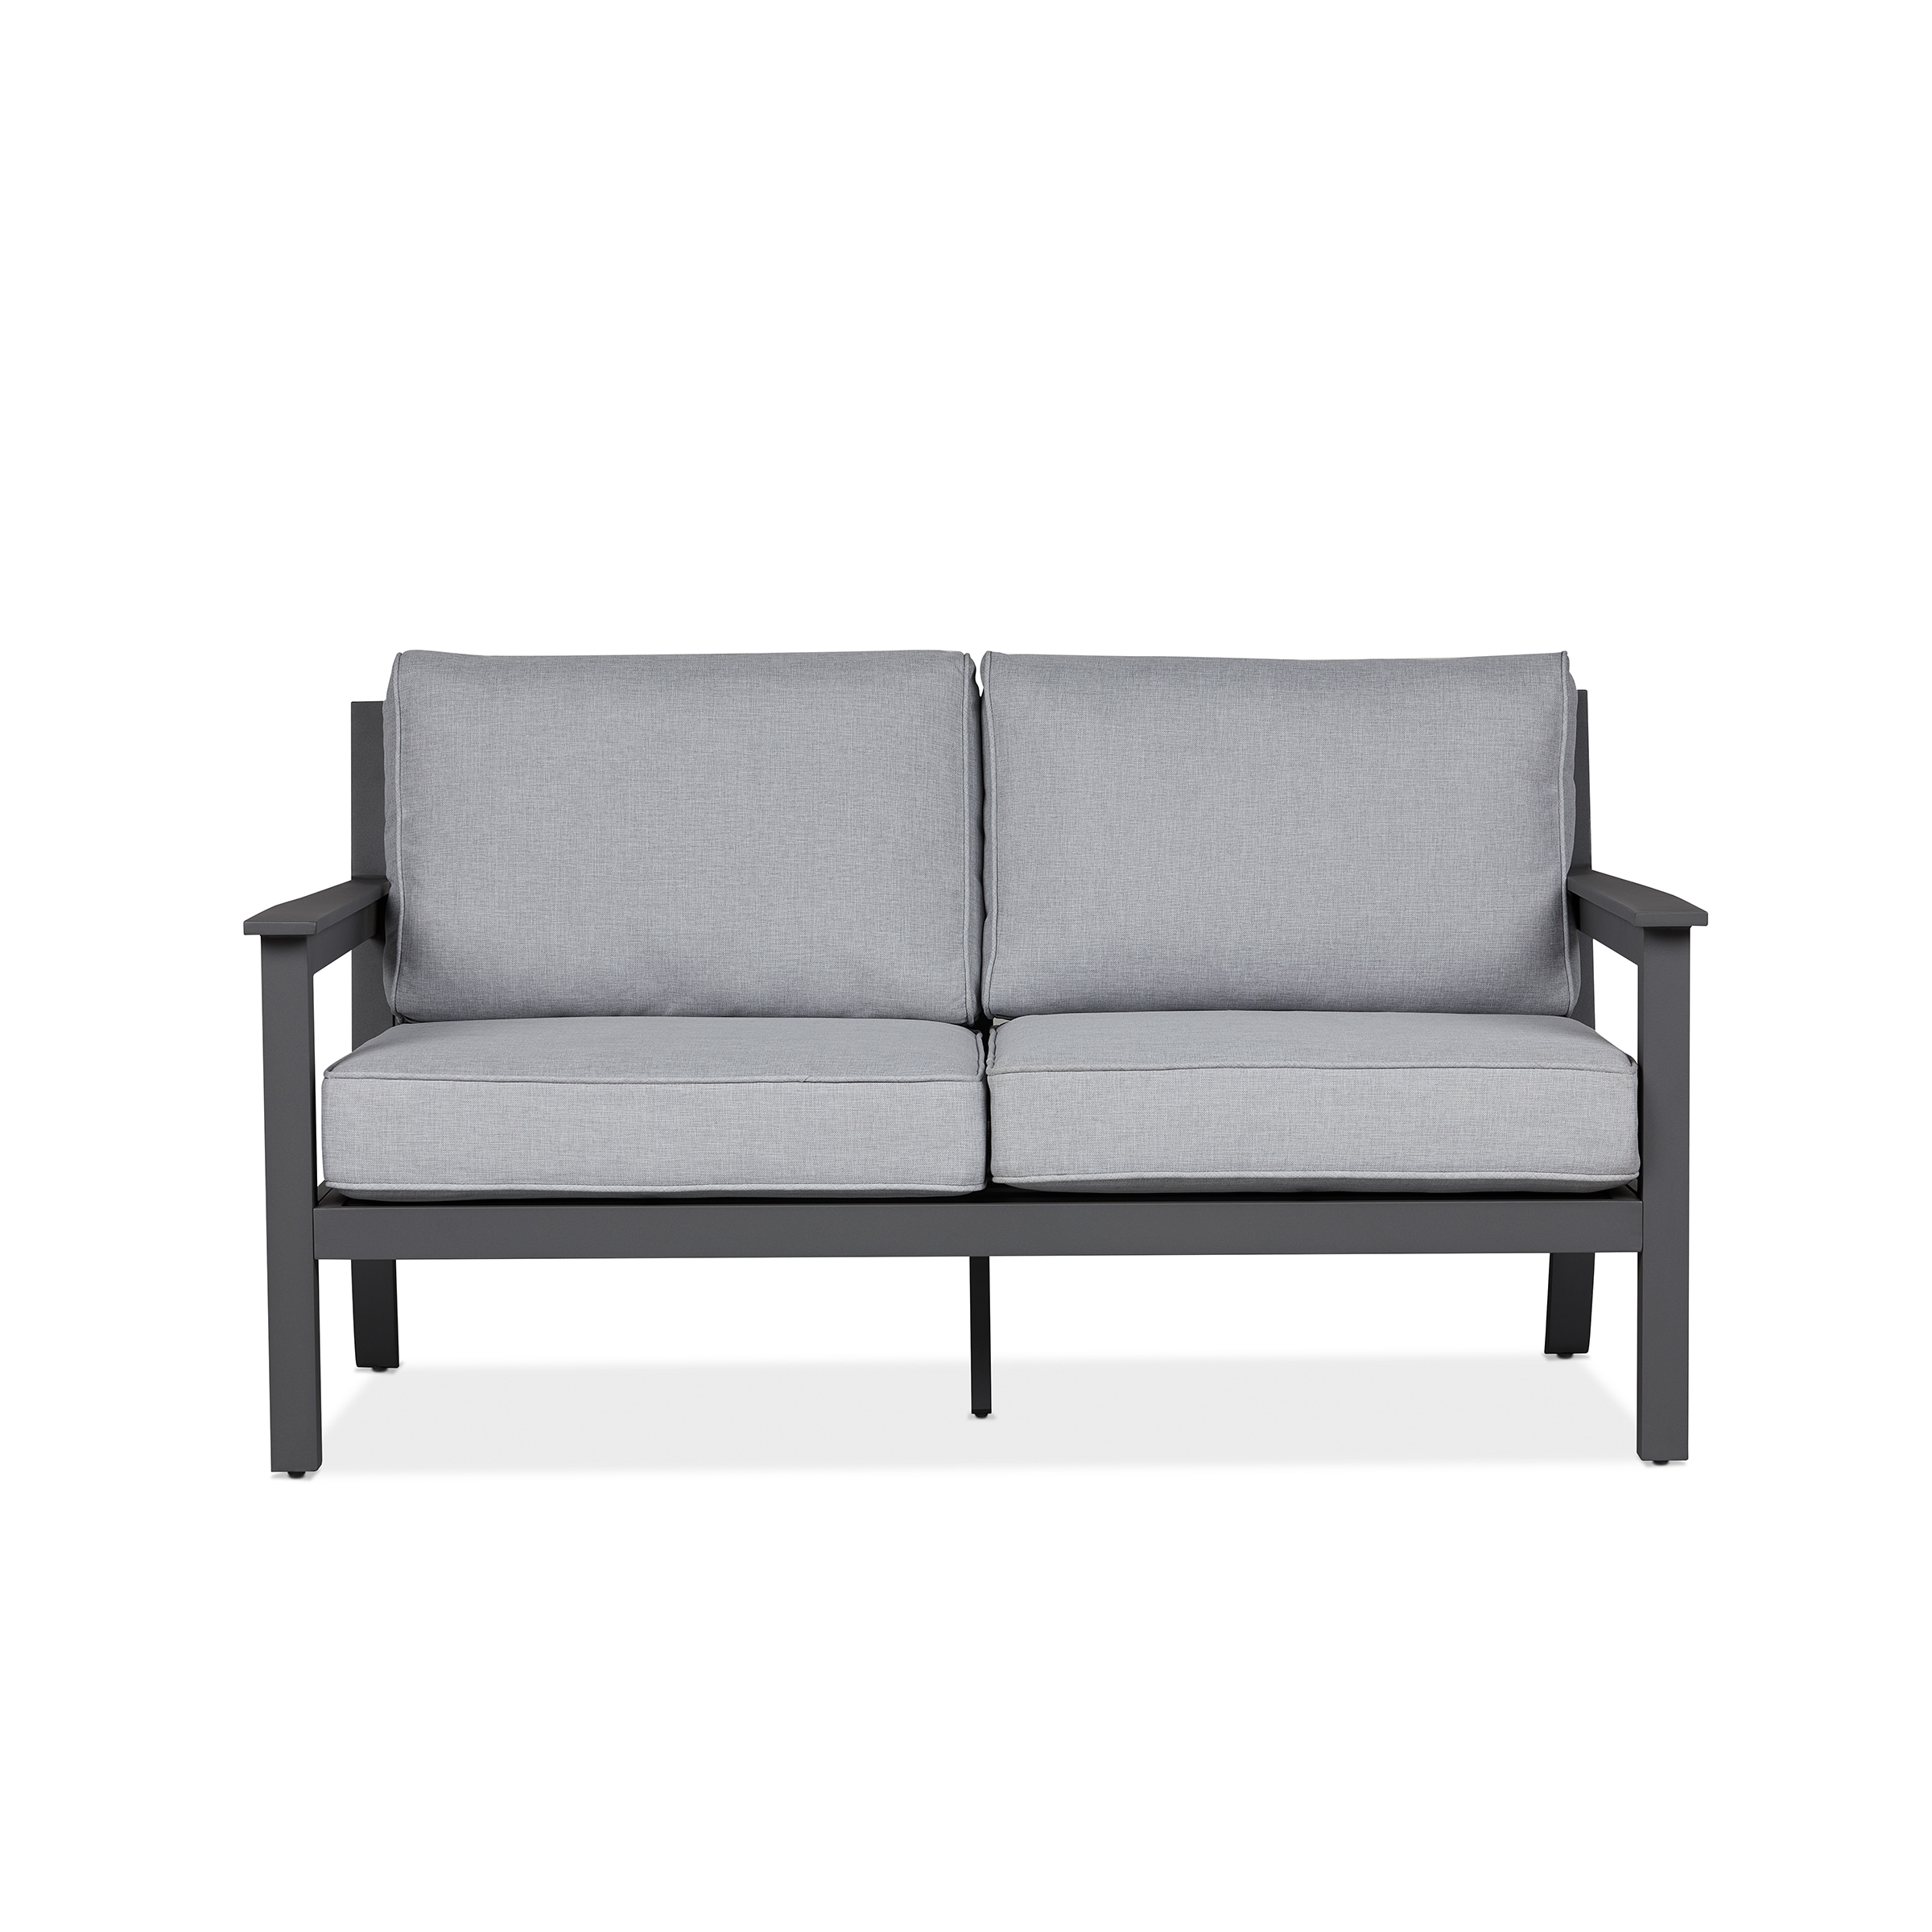 the 2-Seat at Sectionals in Gray Light Outdoor Sofa Cushions Gray department Patio Ortun in Flame with Sofas Real &